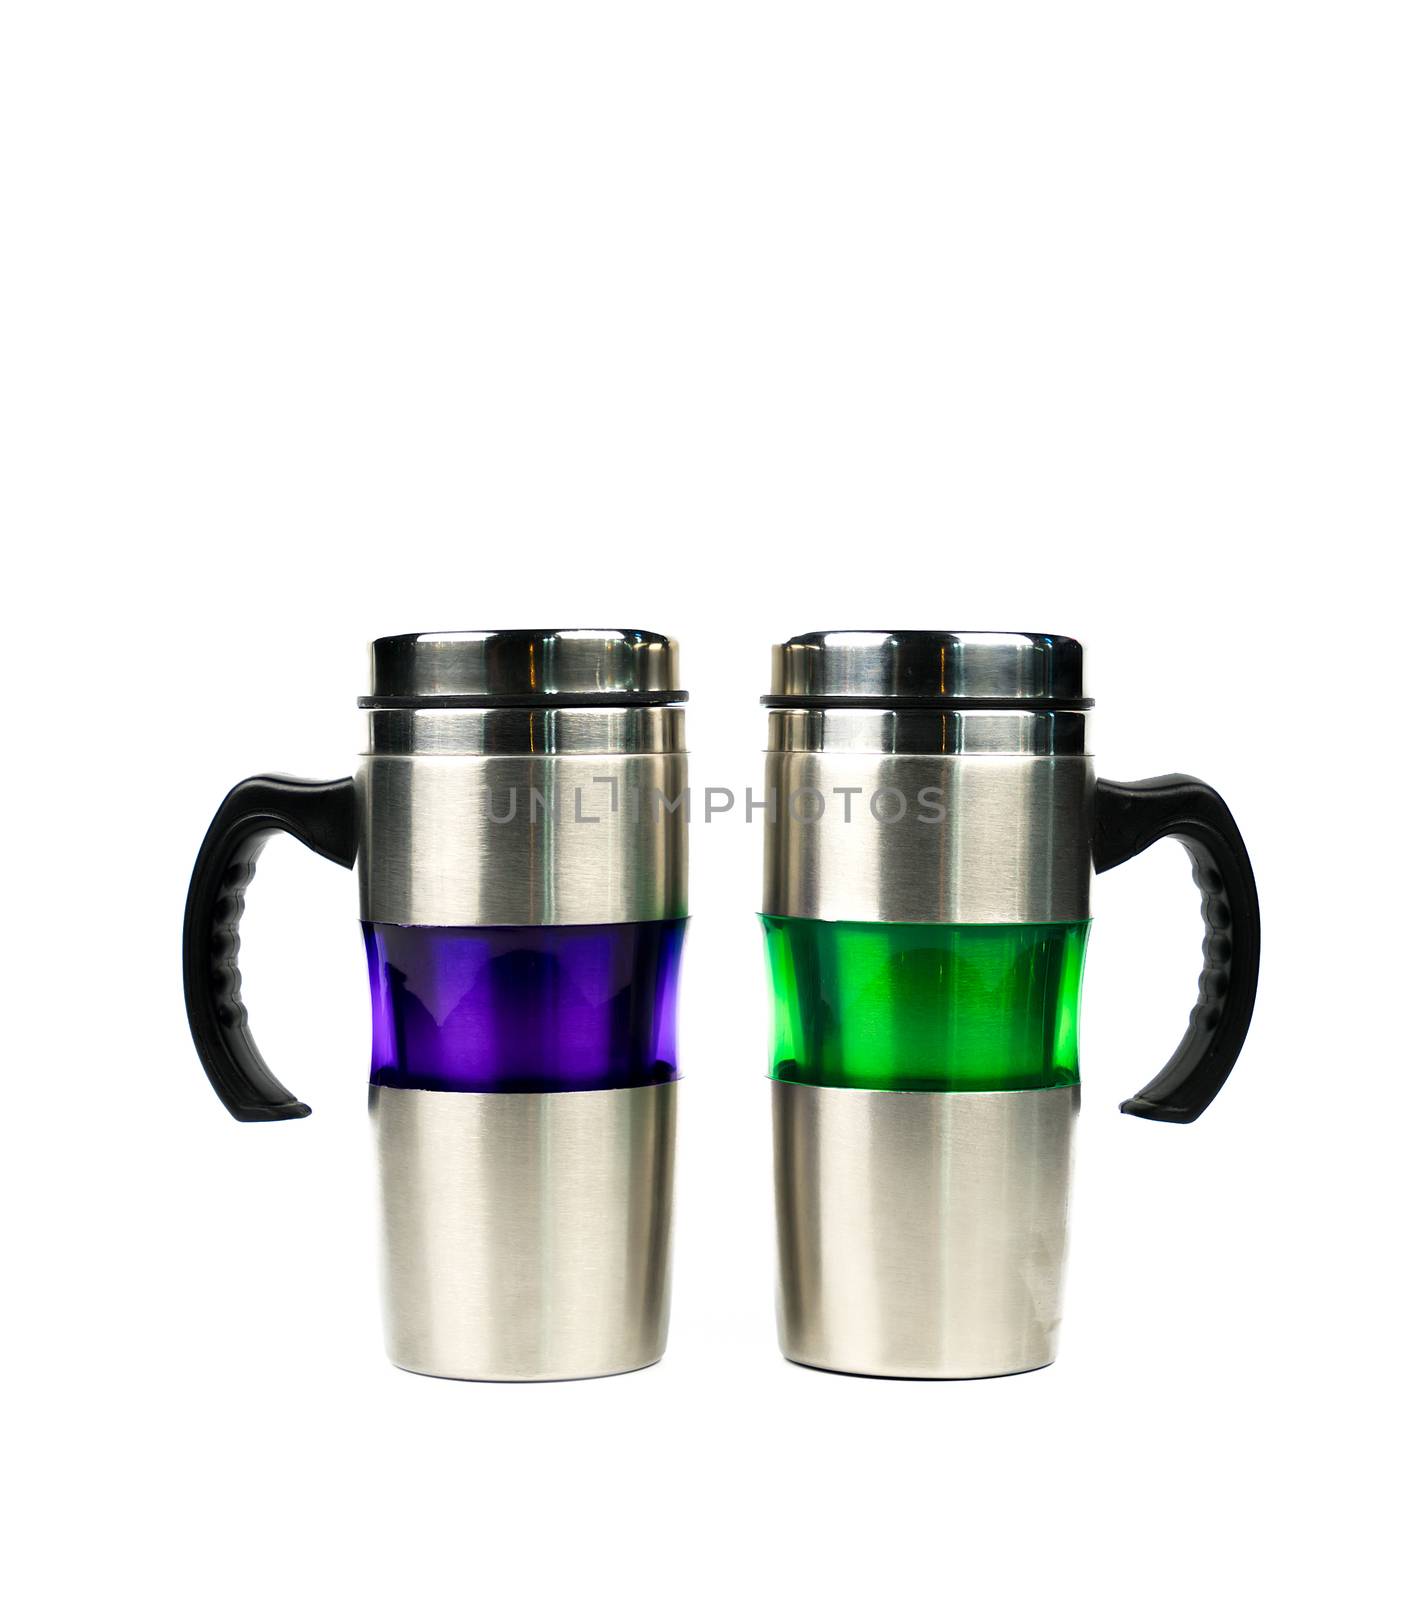 Purple and green thermos bottle with handle isolated on white background with copy space by Fahroni